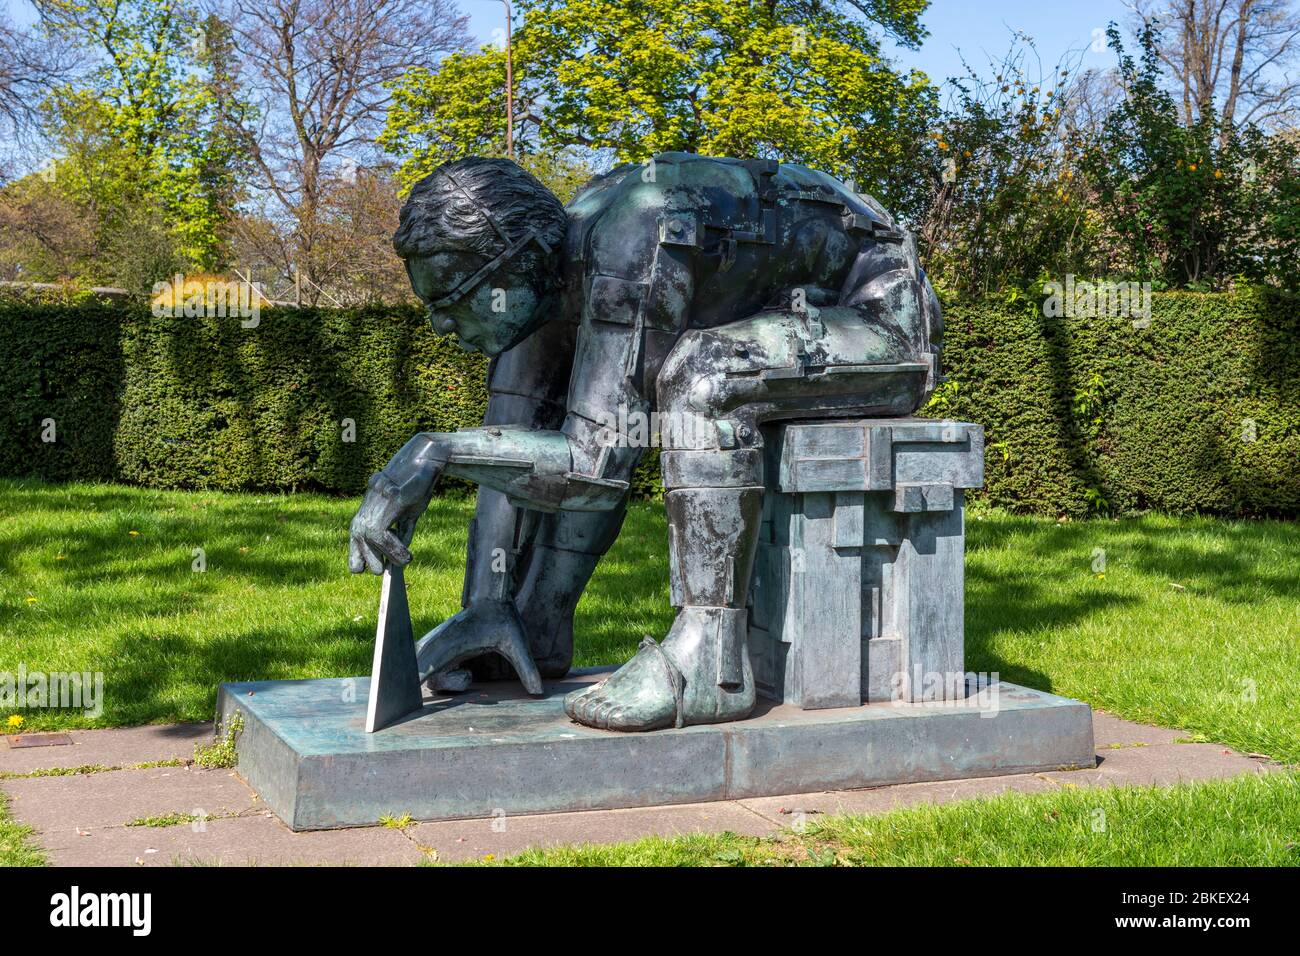 Master of the Universe sculpture by Eduardo Paolozzi in grounds of Scottish National Gallery of Modern Art Two in Edinburgh, Scotland, UK Stock Photo